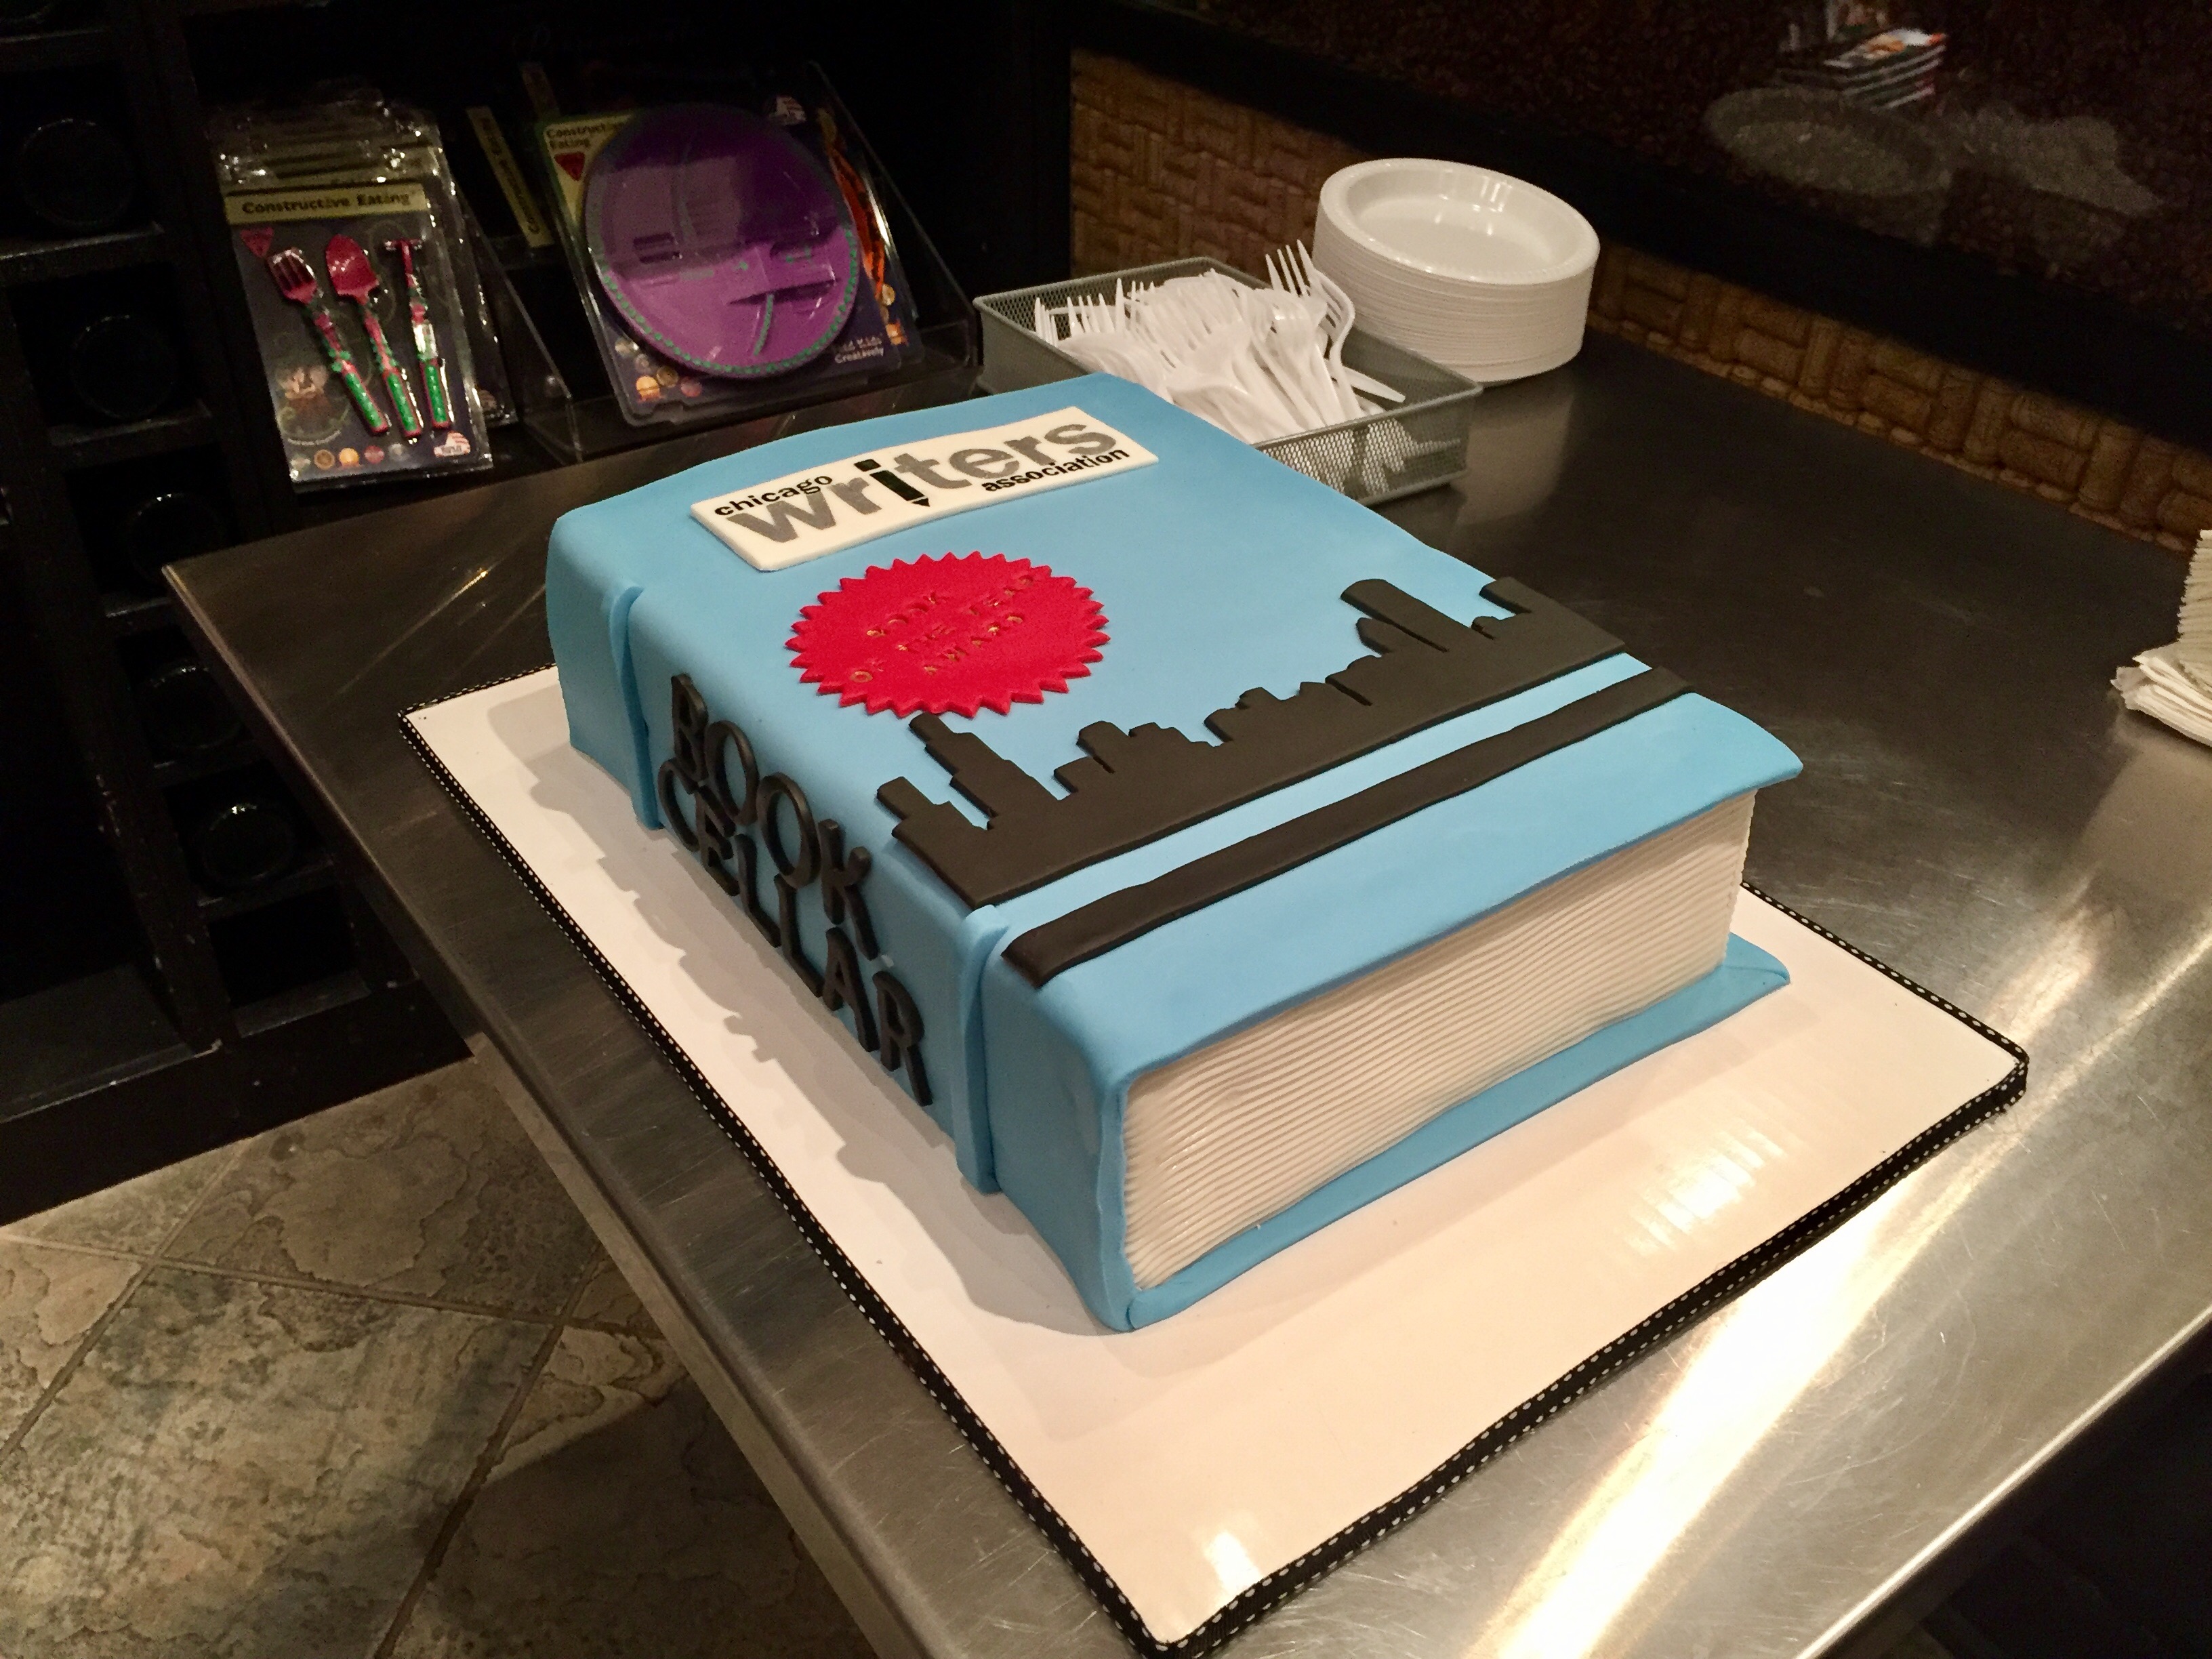 Cake in the shape of a book with the title of Chicago Writers Association